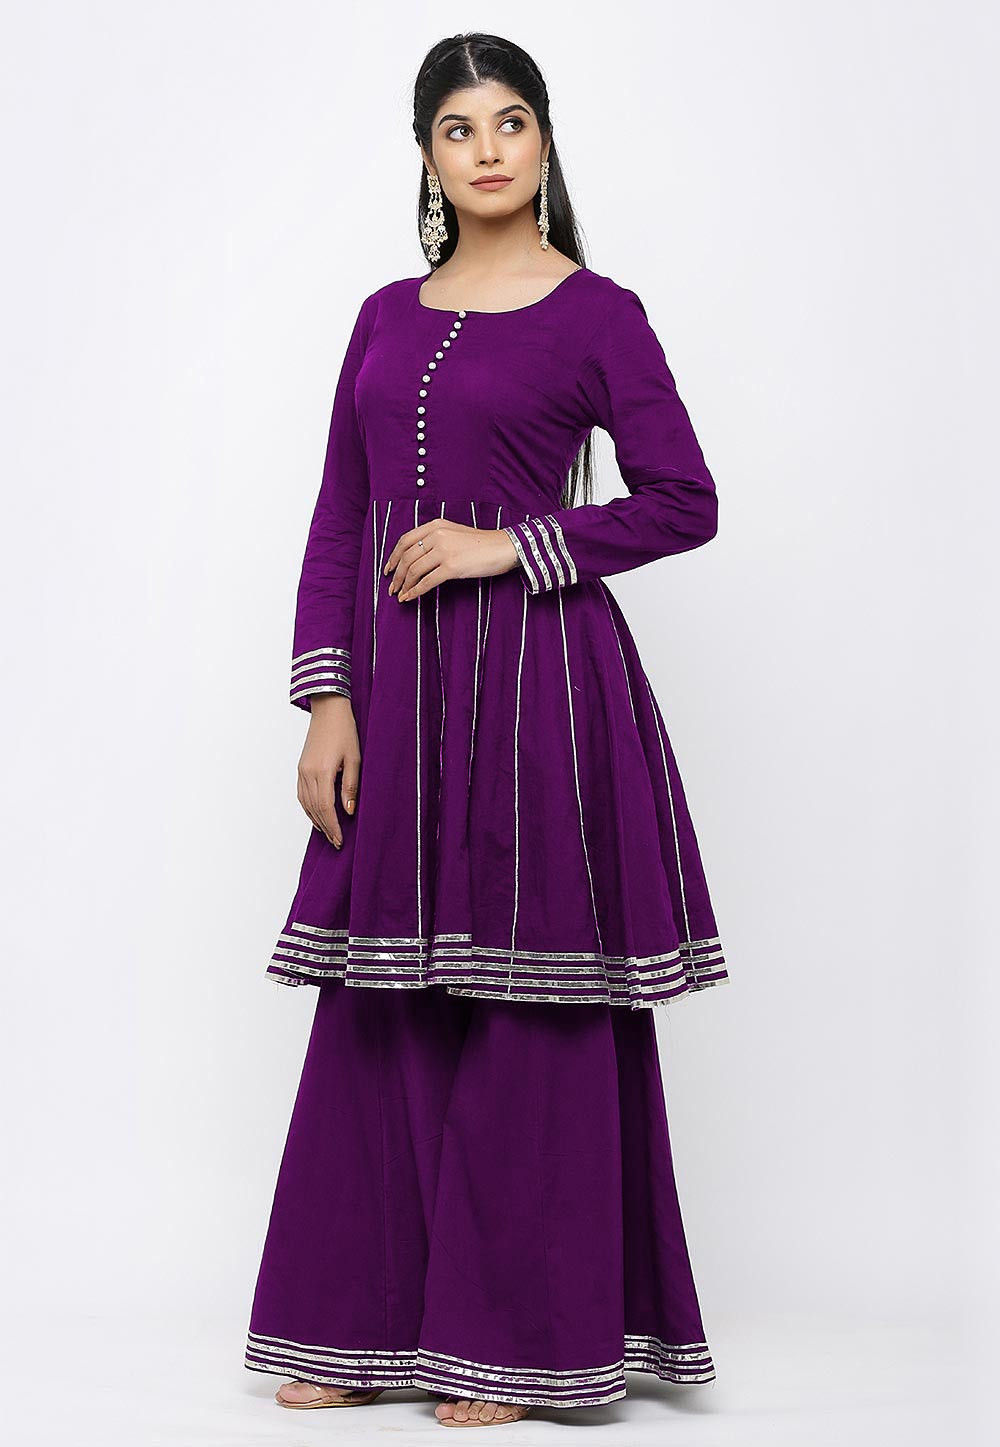 Dress For Women And Girls coton Crepe Material In Purple And White Color  Combination Best Quality